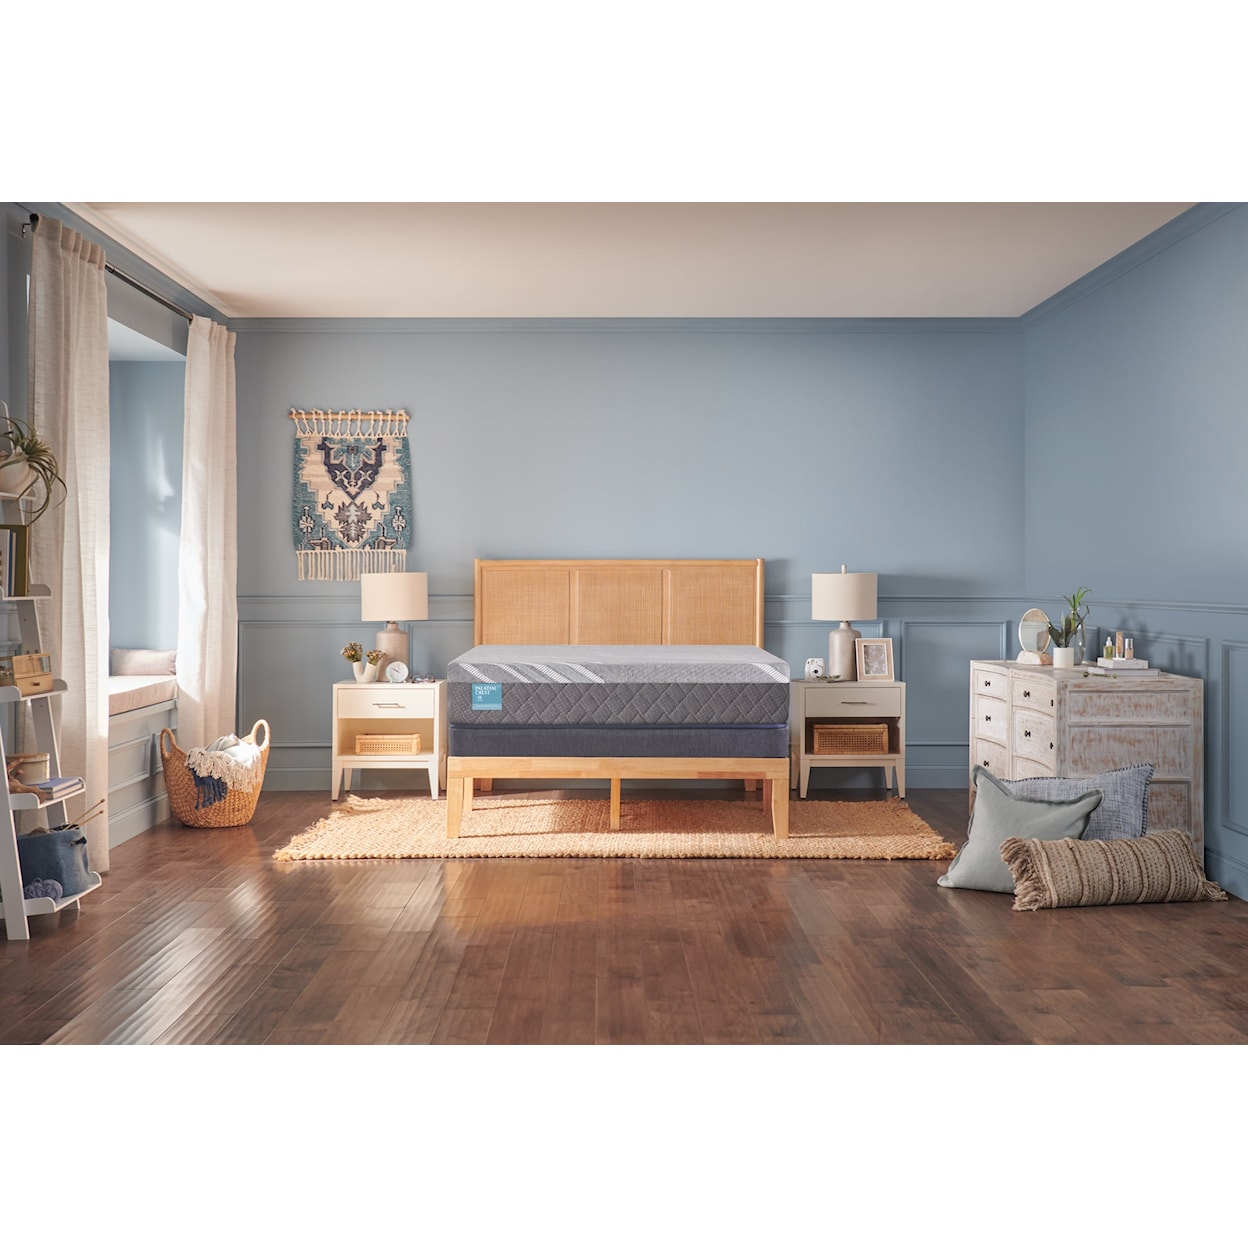 Sealy Palatial Crest H4 Remey Firm Twin Mattress